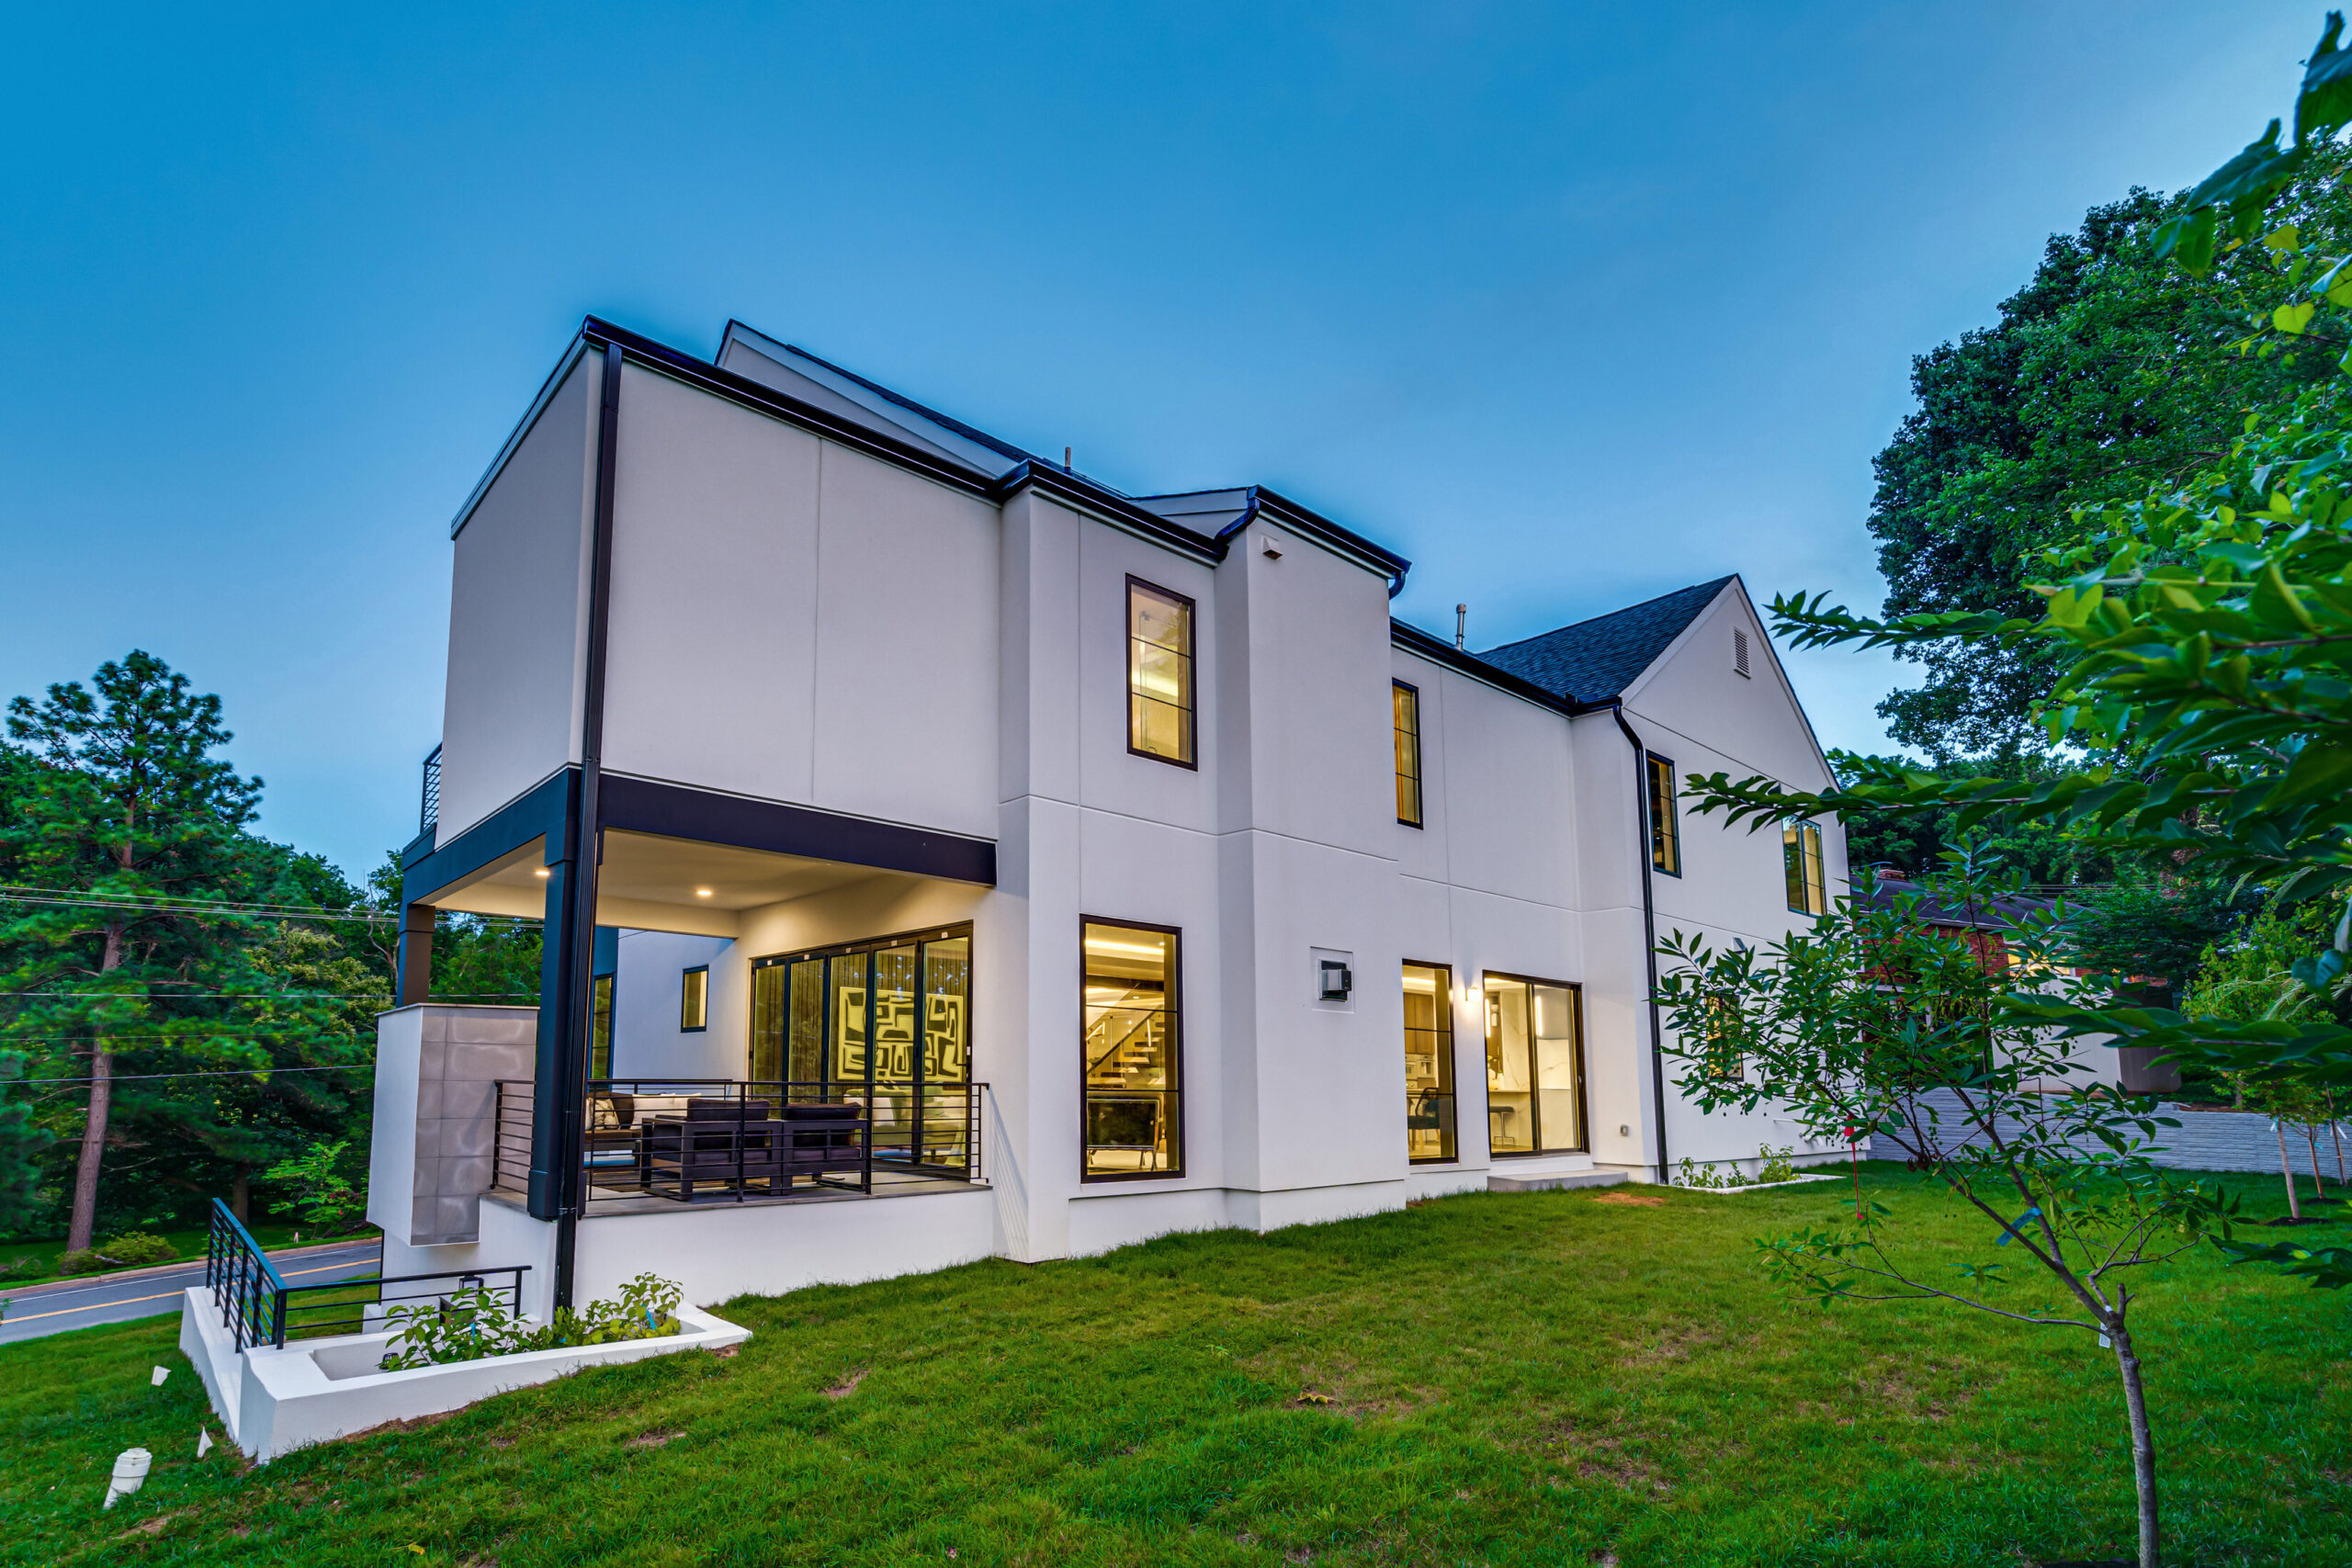 rear exterior view at dusk of modern new construction luxury home in Arlington, Virginia